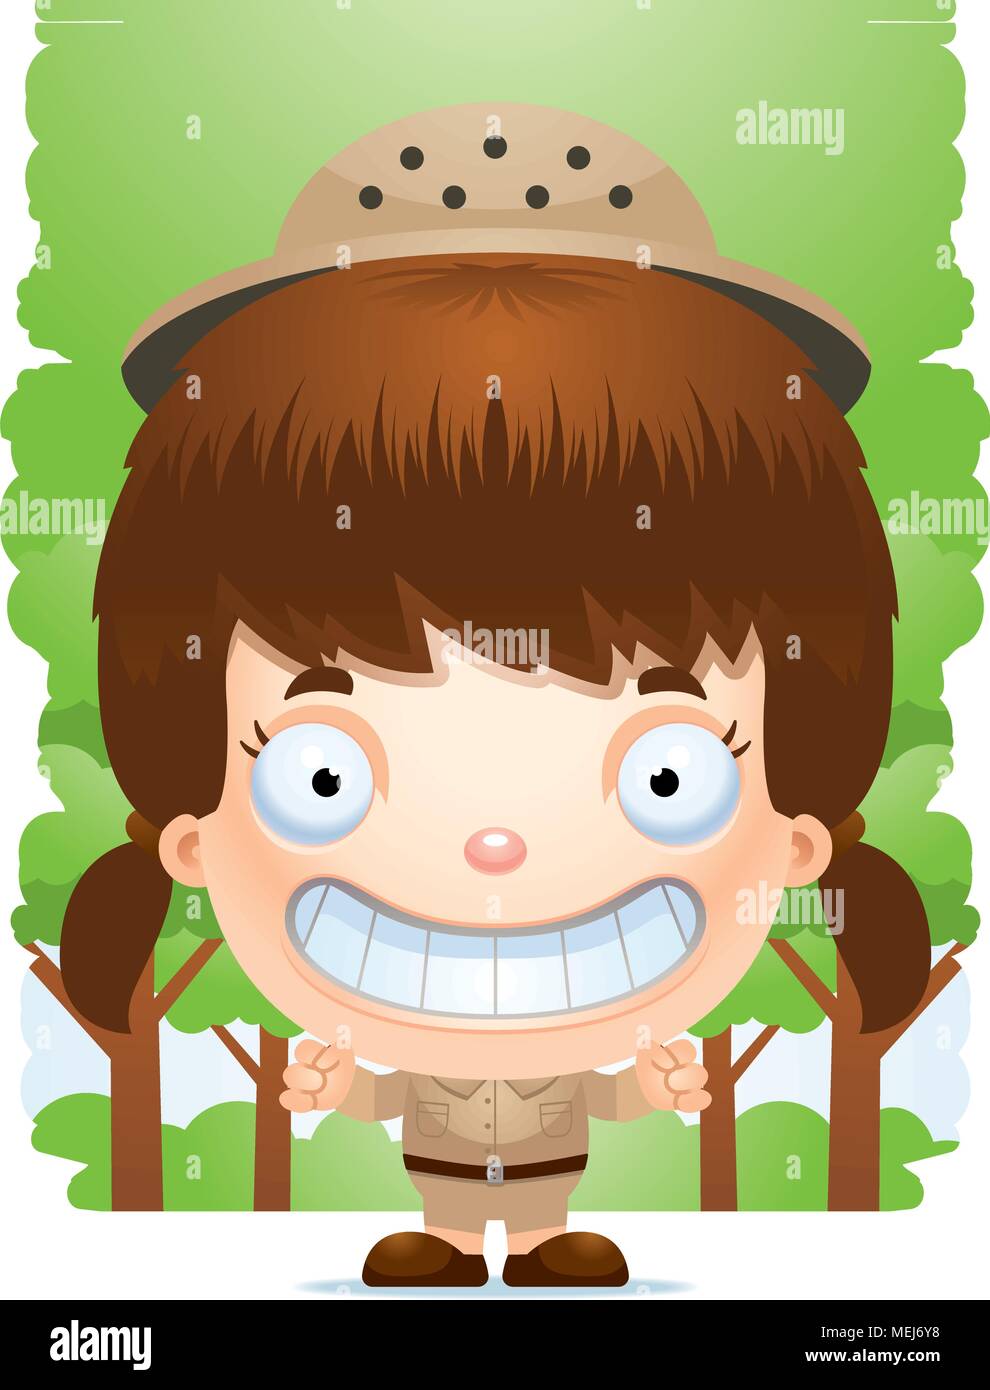 A cartoon illustration of a girl explorer standing and smiling. Stock Vector